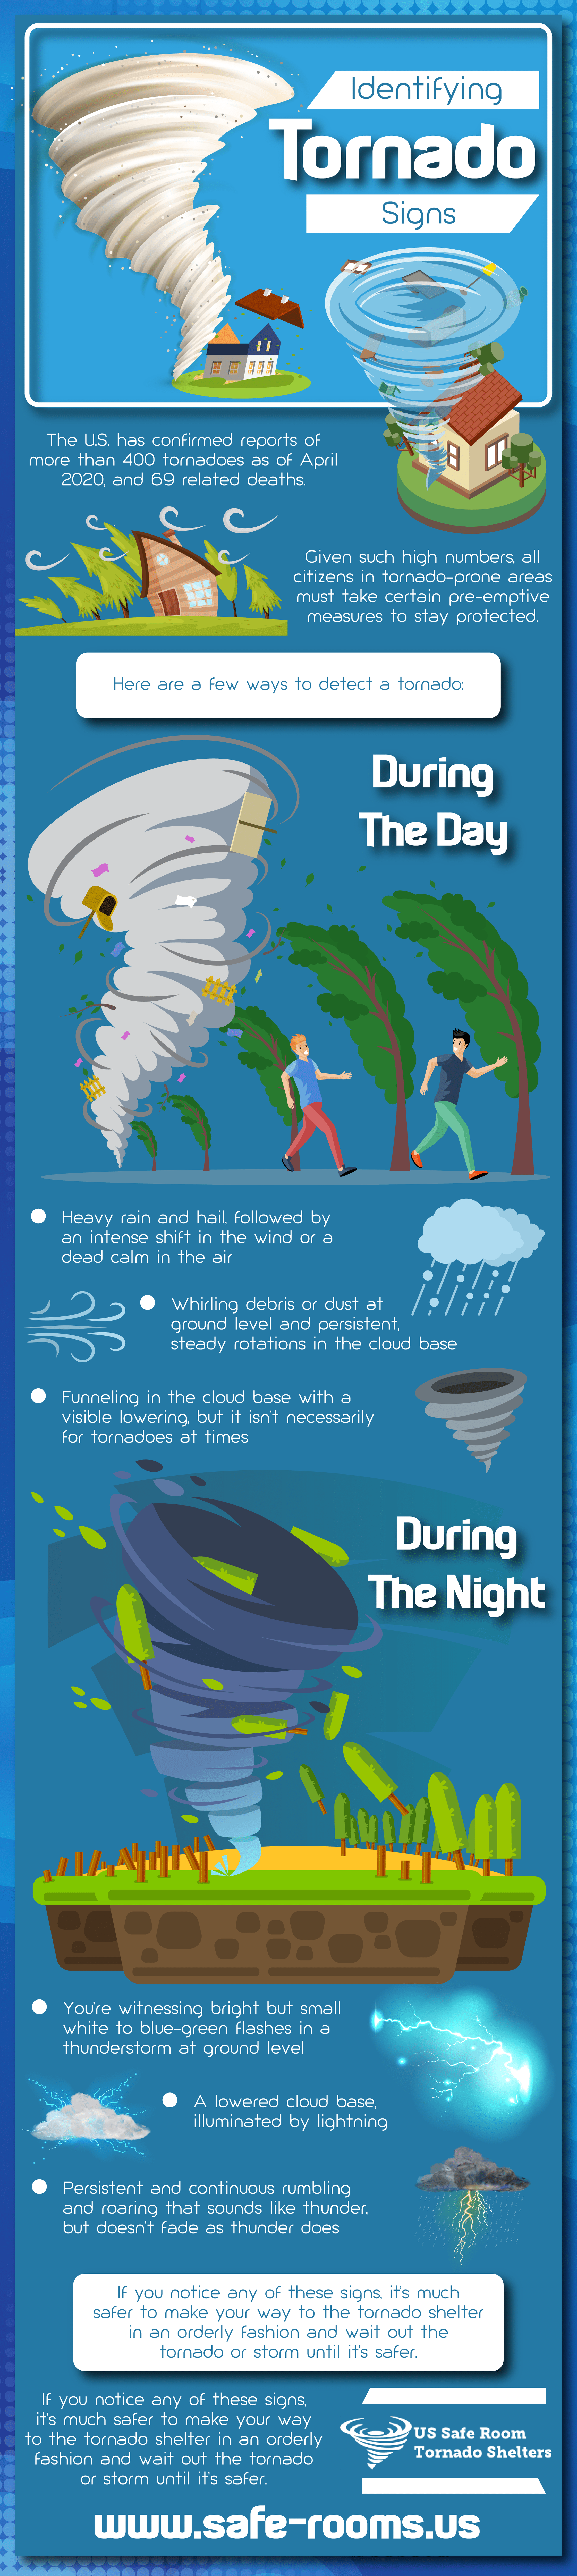 information on tornadoes